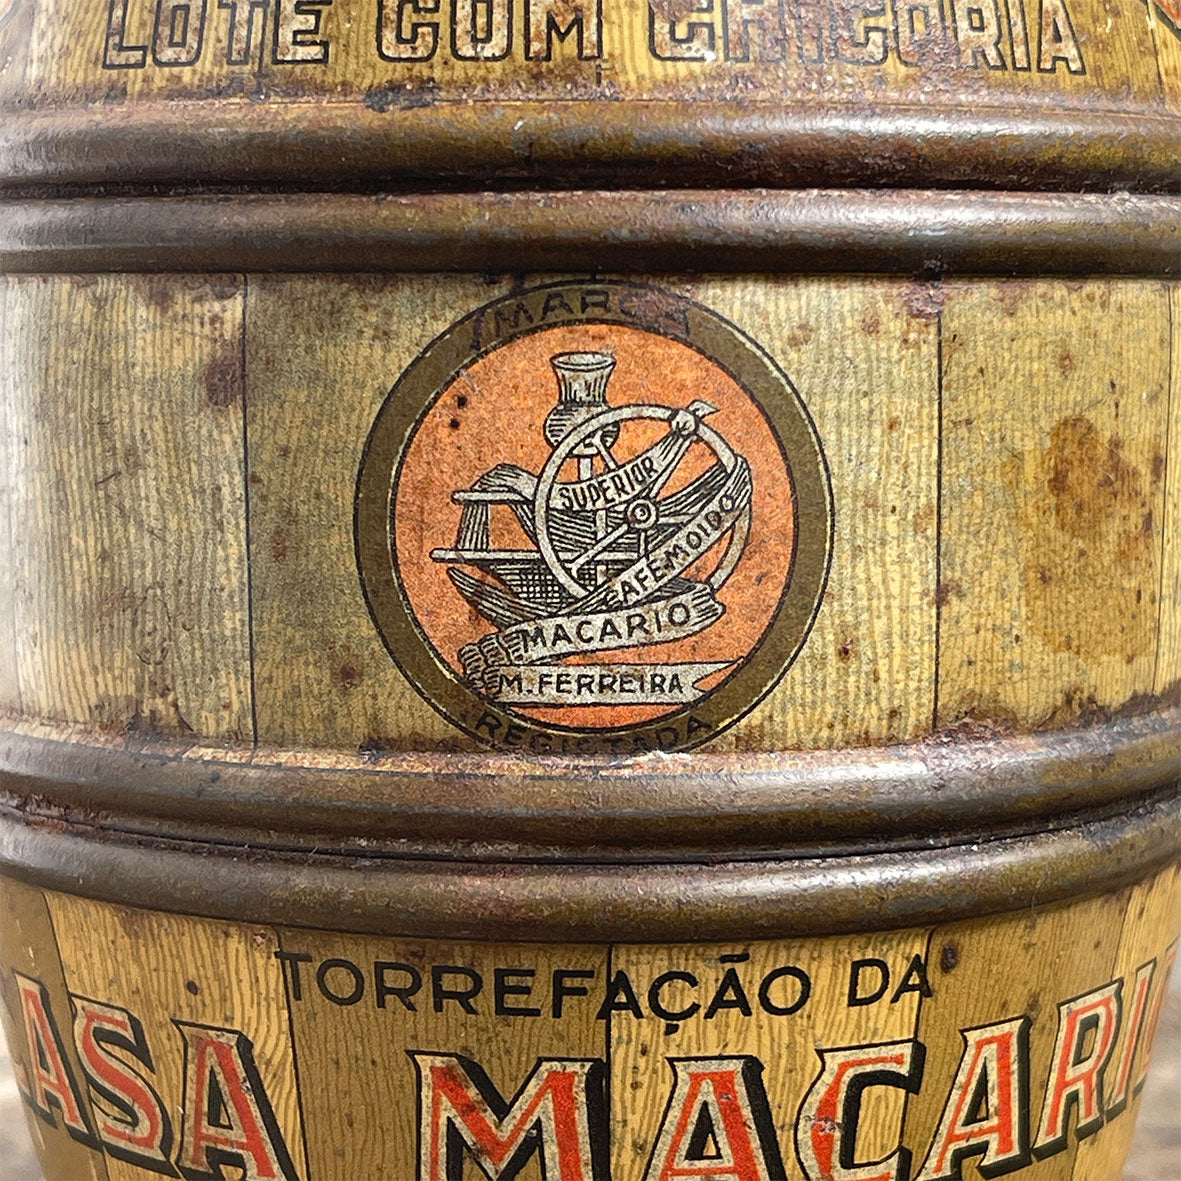 A vintage Cassa Macario Coffee Tin from Lisbon, Portugal - SHOP NOW - www.intovintage.co.uk